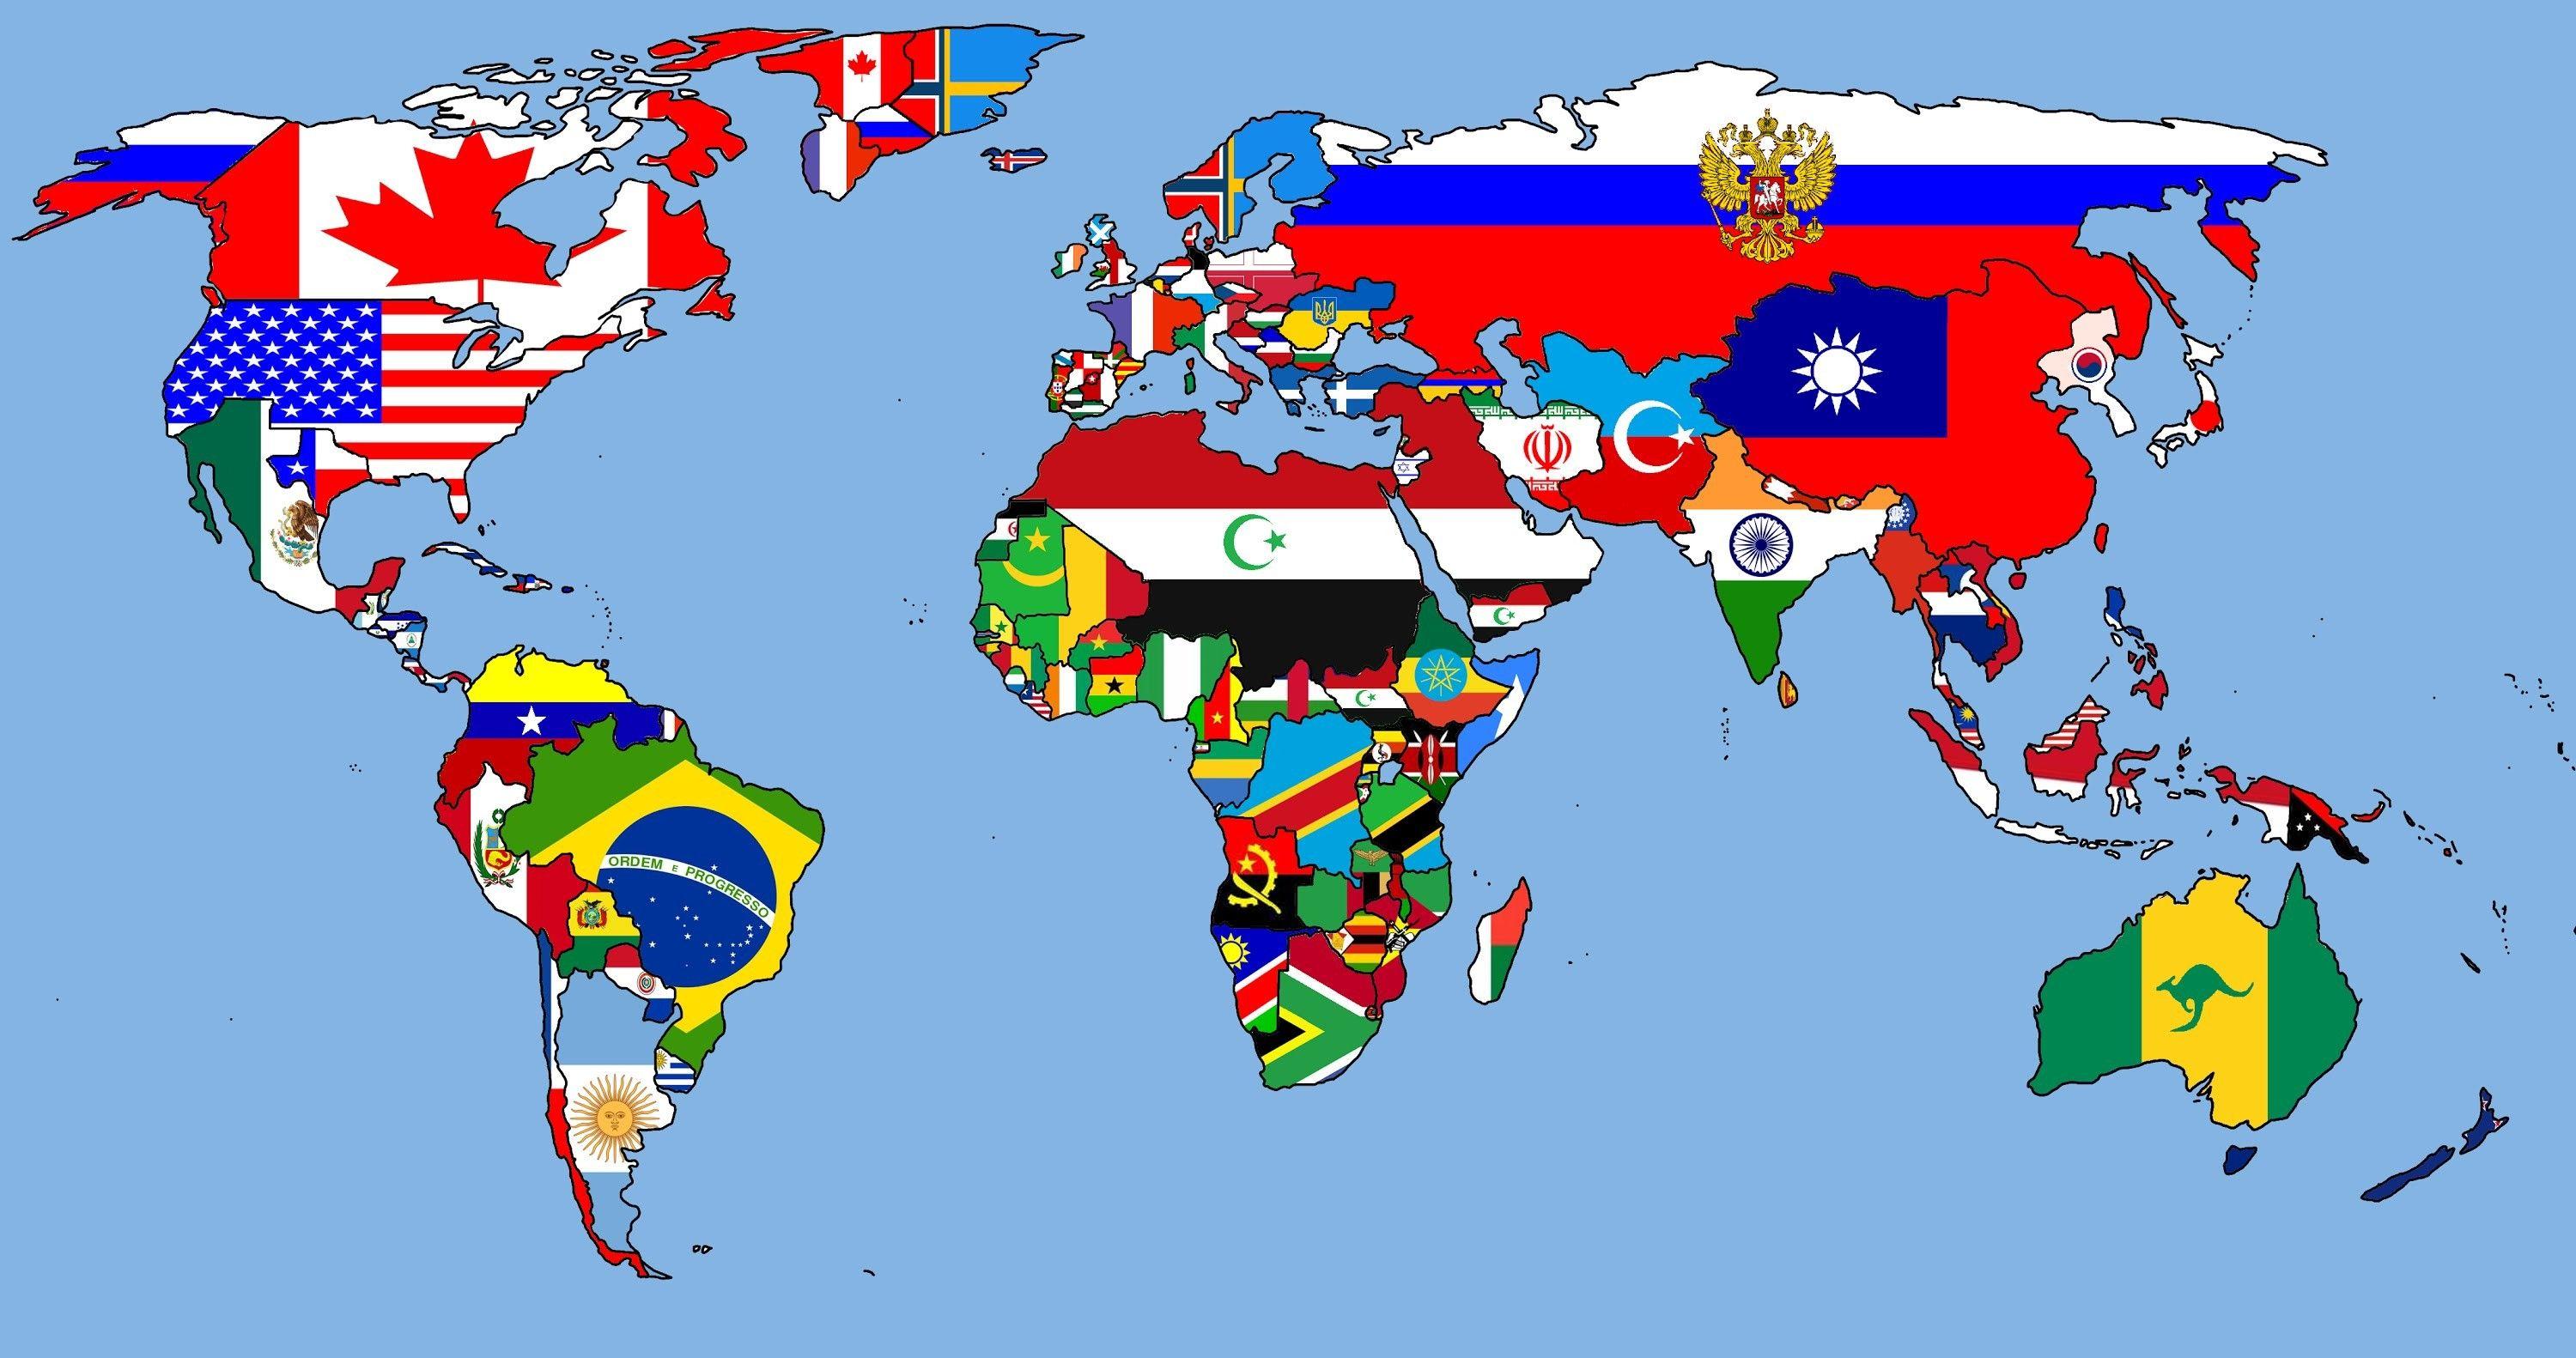 World Map Flags Wallpaper Archives.us Best Of World Map